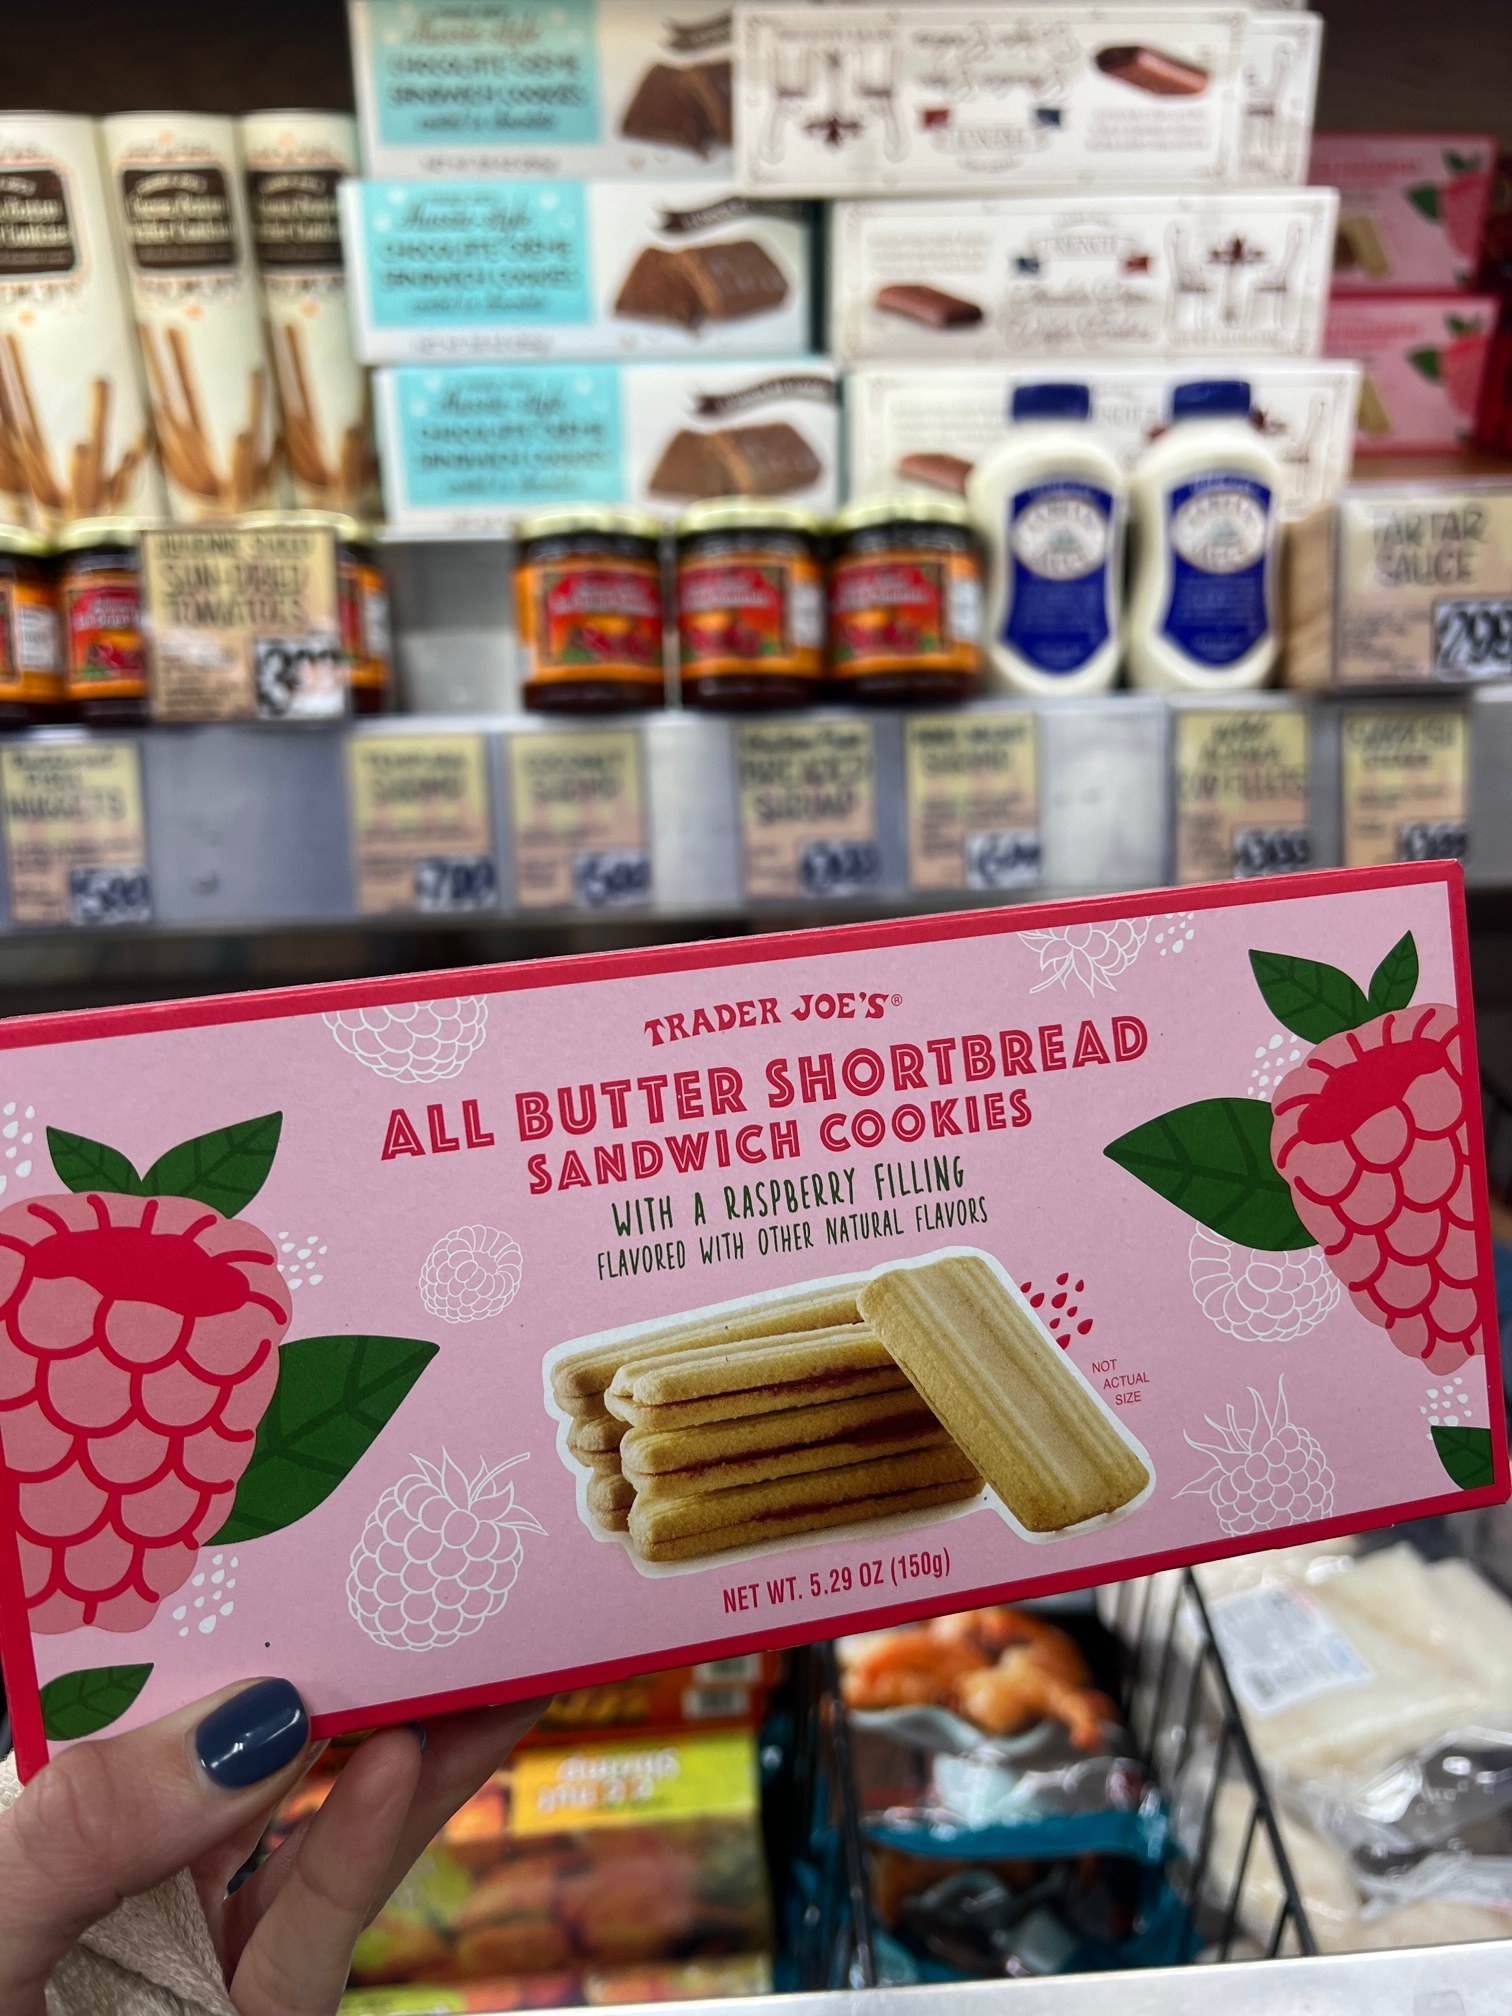 A package of All Butter Shortbread Sandwich Cookies With a Raspberry Filling